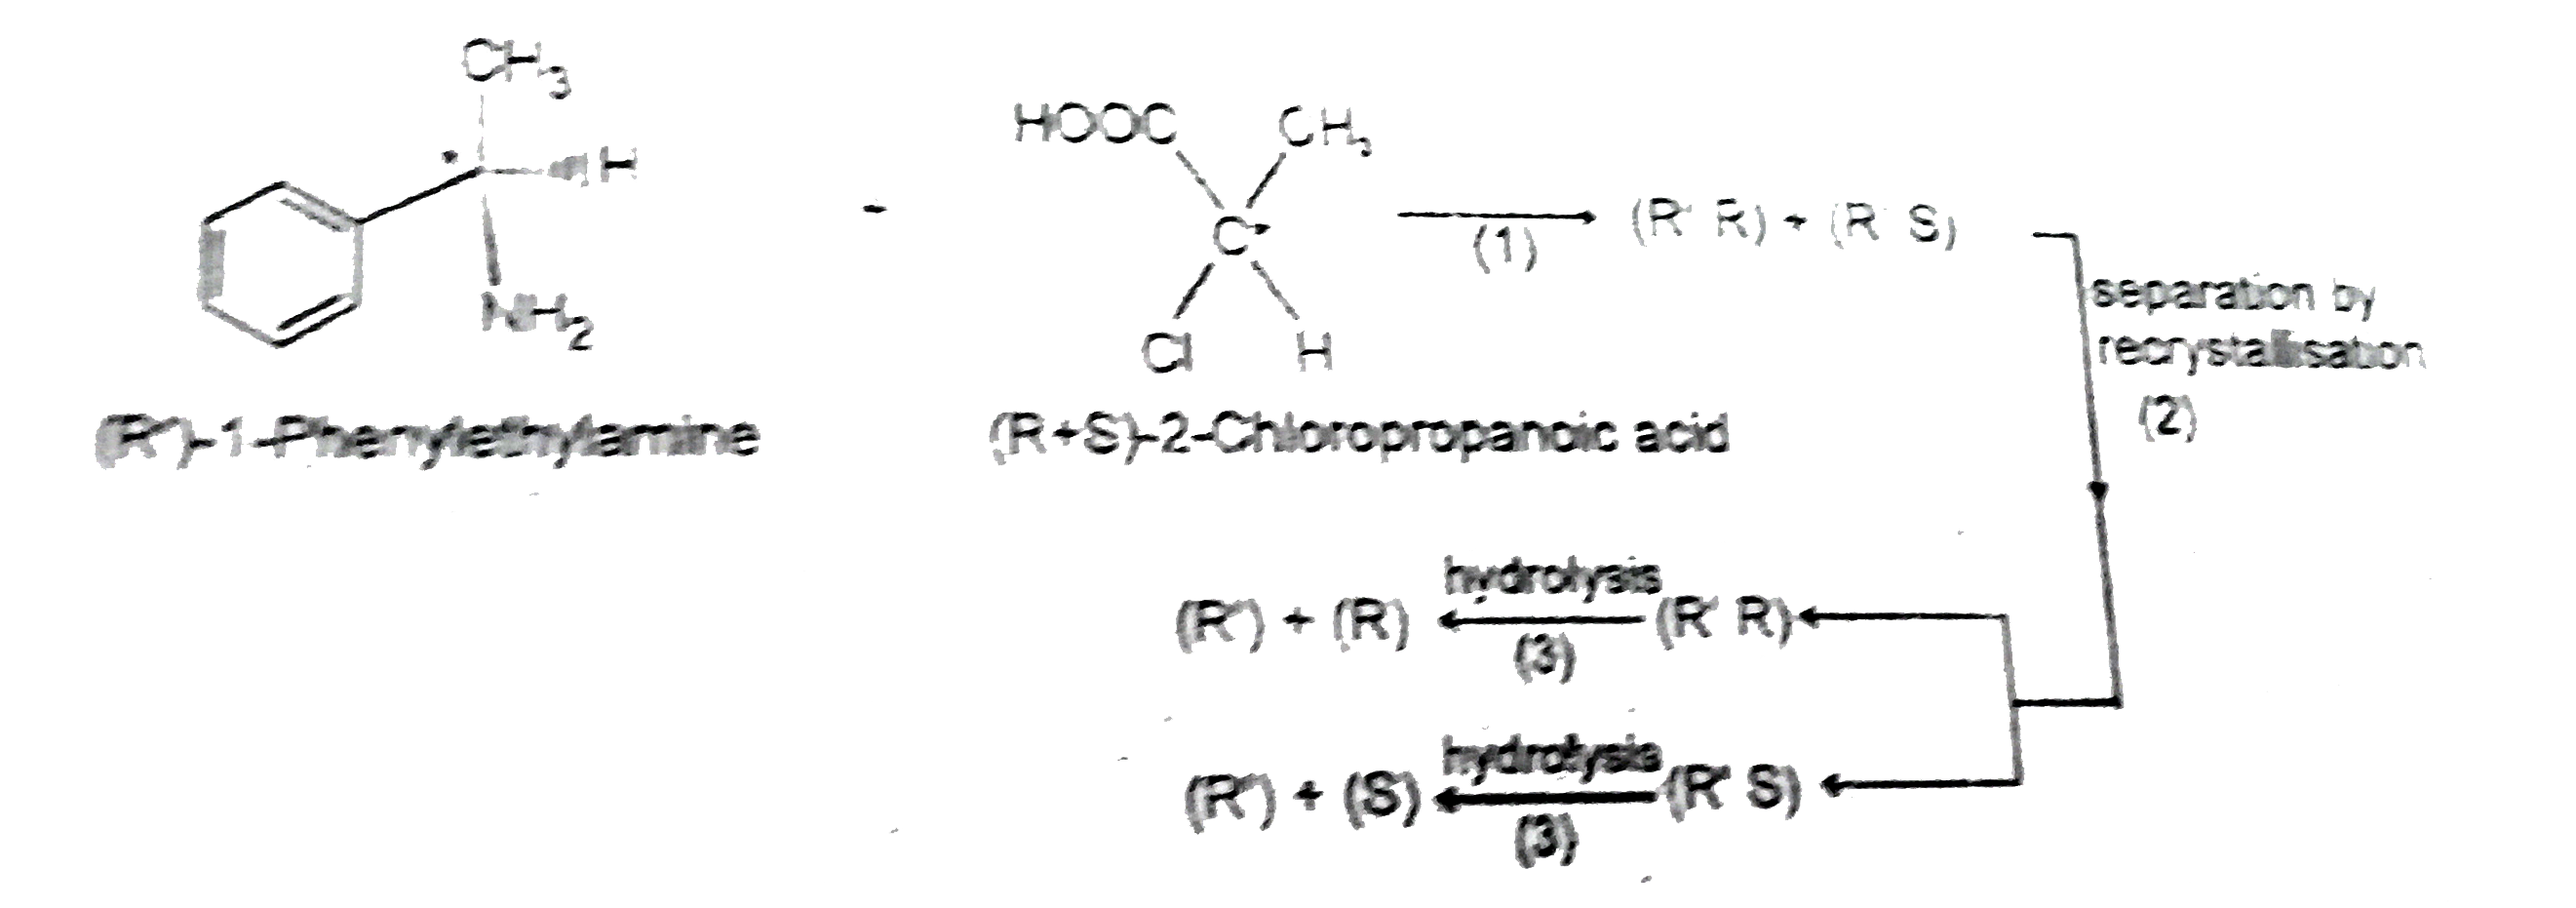 Structural isomers have different covalent linkage of atoms.Steroisomers are compounds that have same sequence of covalent bonds but differ in the relative positions of their atoms in space.Geometrical and optical isomers are the two important types of configurational isomers.   The compound with double bonds or ring structure have restricated rotation.so exist in two geometrical forms.The double bonds in the larger rings (ring size 10 carbon or large) can also cause geometrical isomerism. The optical isomers rotate the plane of plane-polarised light.A sp^3-hybridised carbon atom bearing four different types of substituents is called an asymmetric centre or chiral centre.A chiral object or molecule cannot be superimposed on its mirror image.Stereoisomers that are mirror images of each other are called enantiomers.The stereoisomers that are not mirror images of each other are called diastereomers.Diastereomers have different physical properties.   A racemic mixture is optically inactive and contains equal amount of both the enantiomers.Resolution refers to method of separating a racemic mixture into two pure enantiomers.A meso compound is an optically inactive stereoisomers, which is achiral due to the presence of an internal plane of symmetry within the molecule.   Observe the following reaction      Which statement is not correct about the above observation.